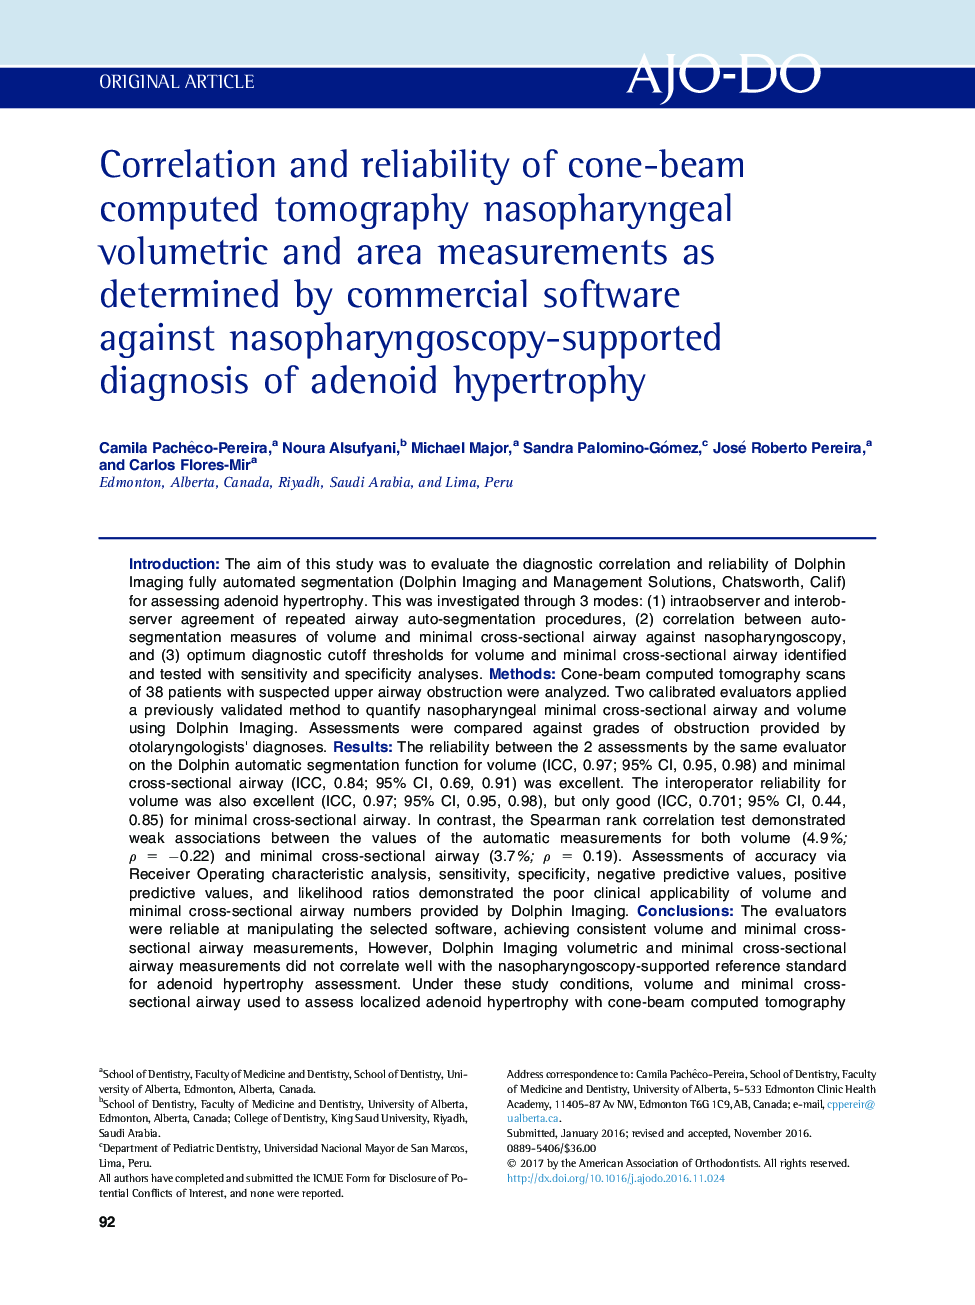 Correlation and reliability of cone-beam computed tomography nasopharyngeal volumetric and area measurements as determined by commercial software against nasopharyngoscopy-supported diagnosis of adenoid hypertrophy